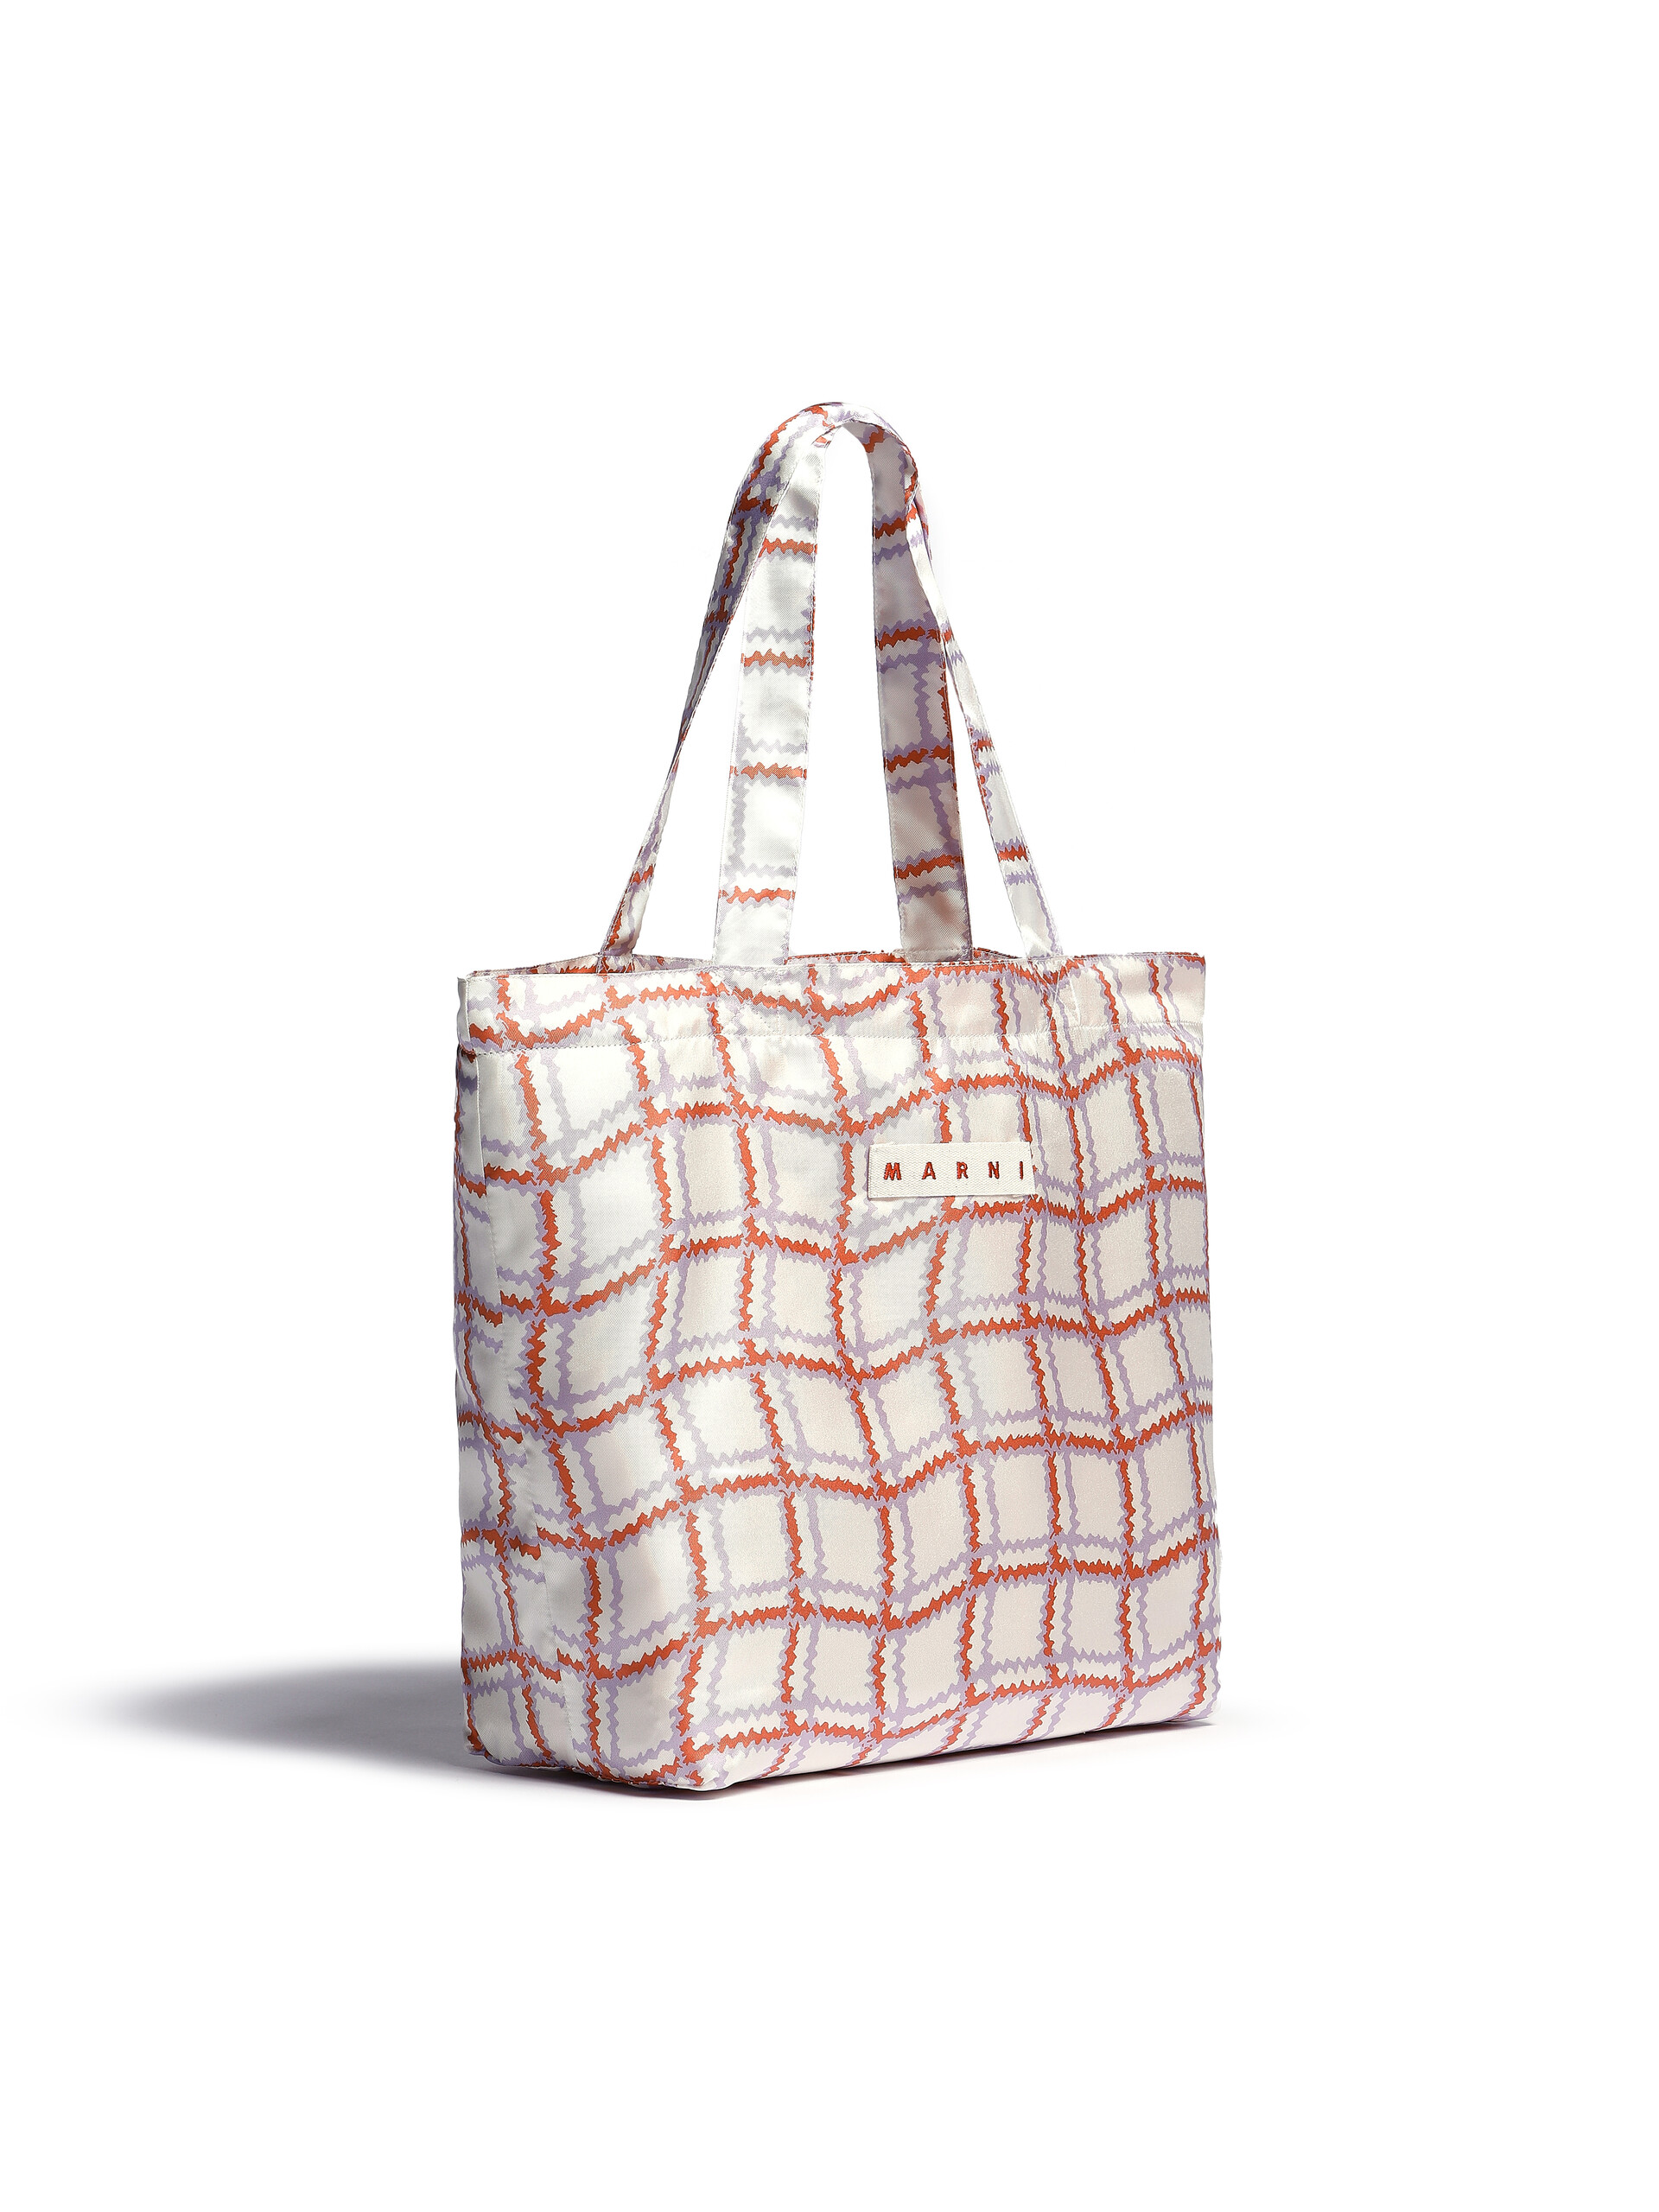 White silk tote bag with archival check print - Bags - Image 2